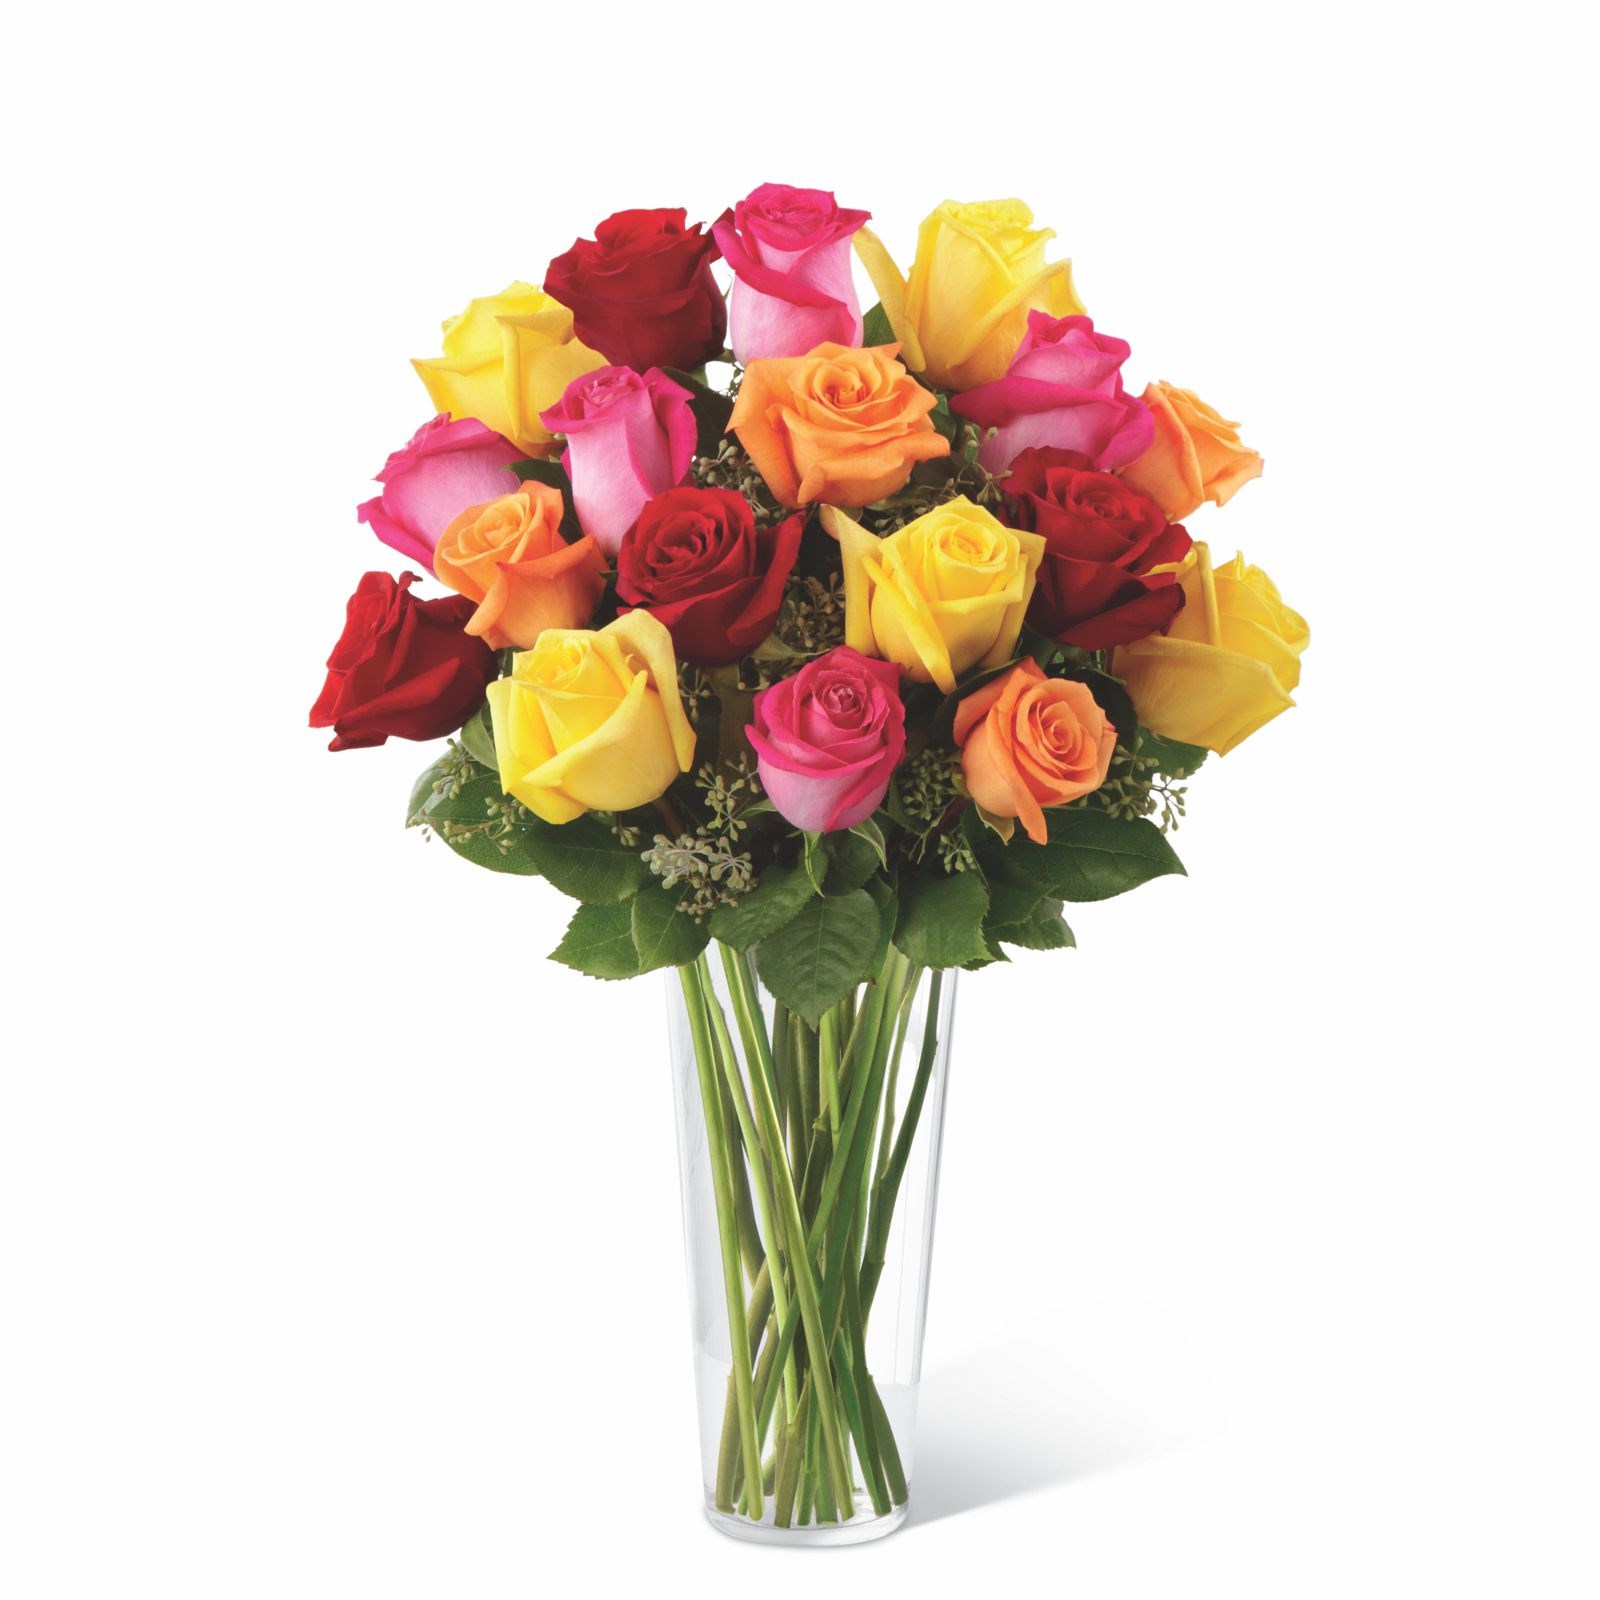 product image for The FTD Bright Spark Rose Arrangement